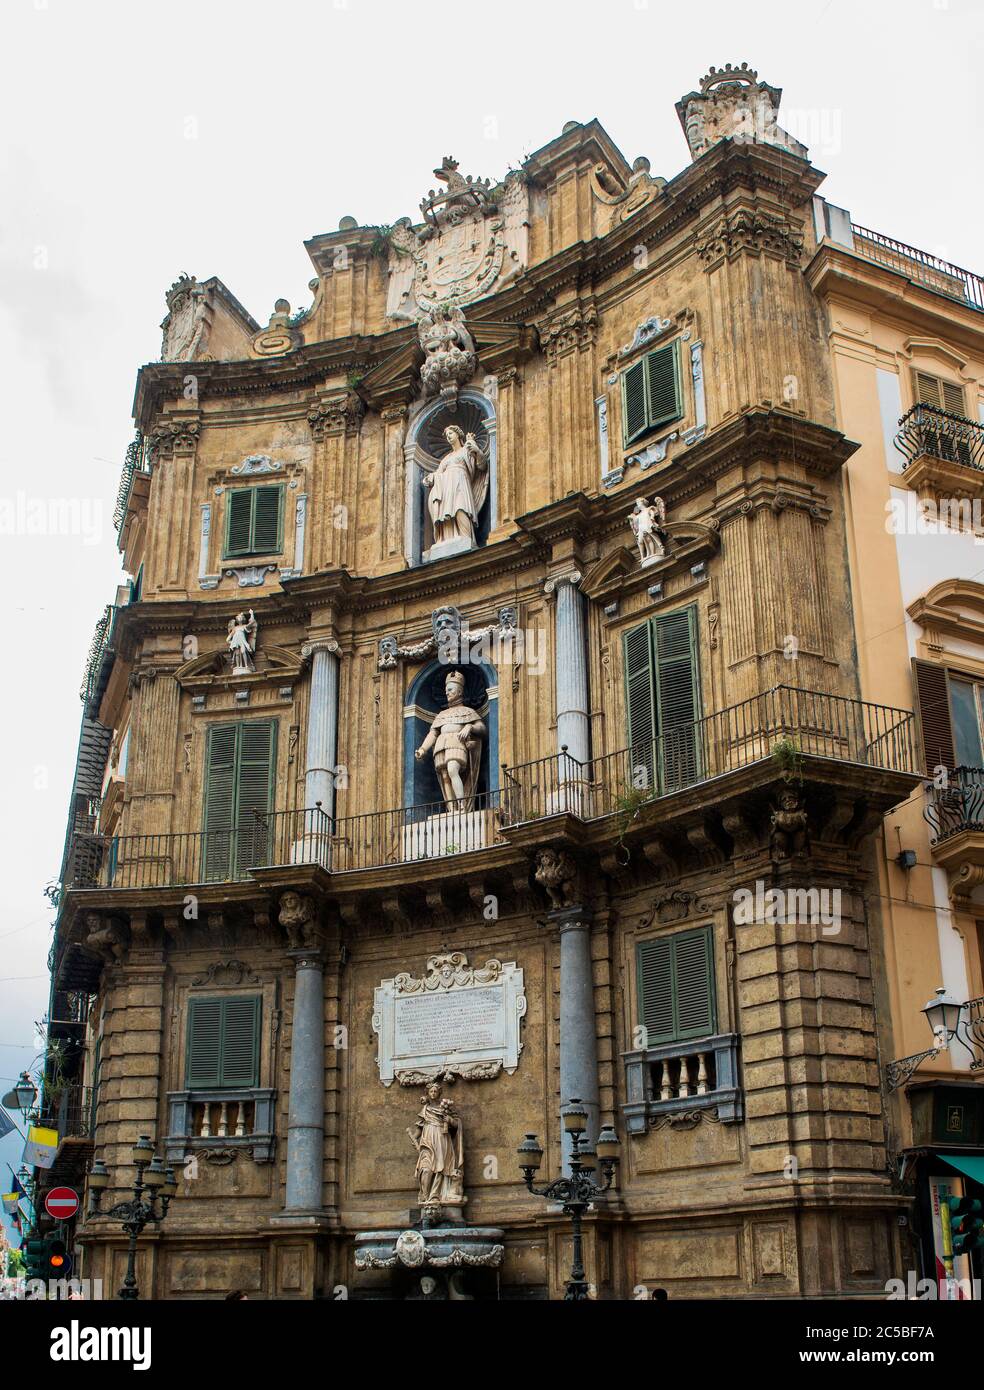 Quattro Canti - Four Corners, officially known as Piazza Vigliena, is a Baroque square in Palermo, Sicily, Italy Stock Photo